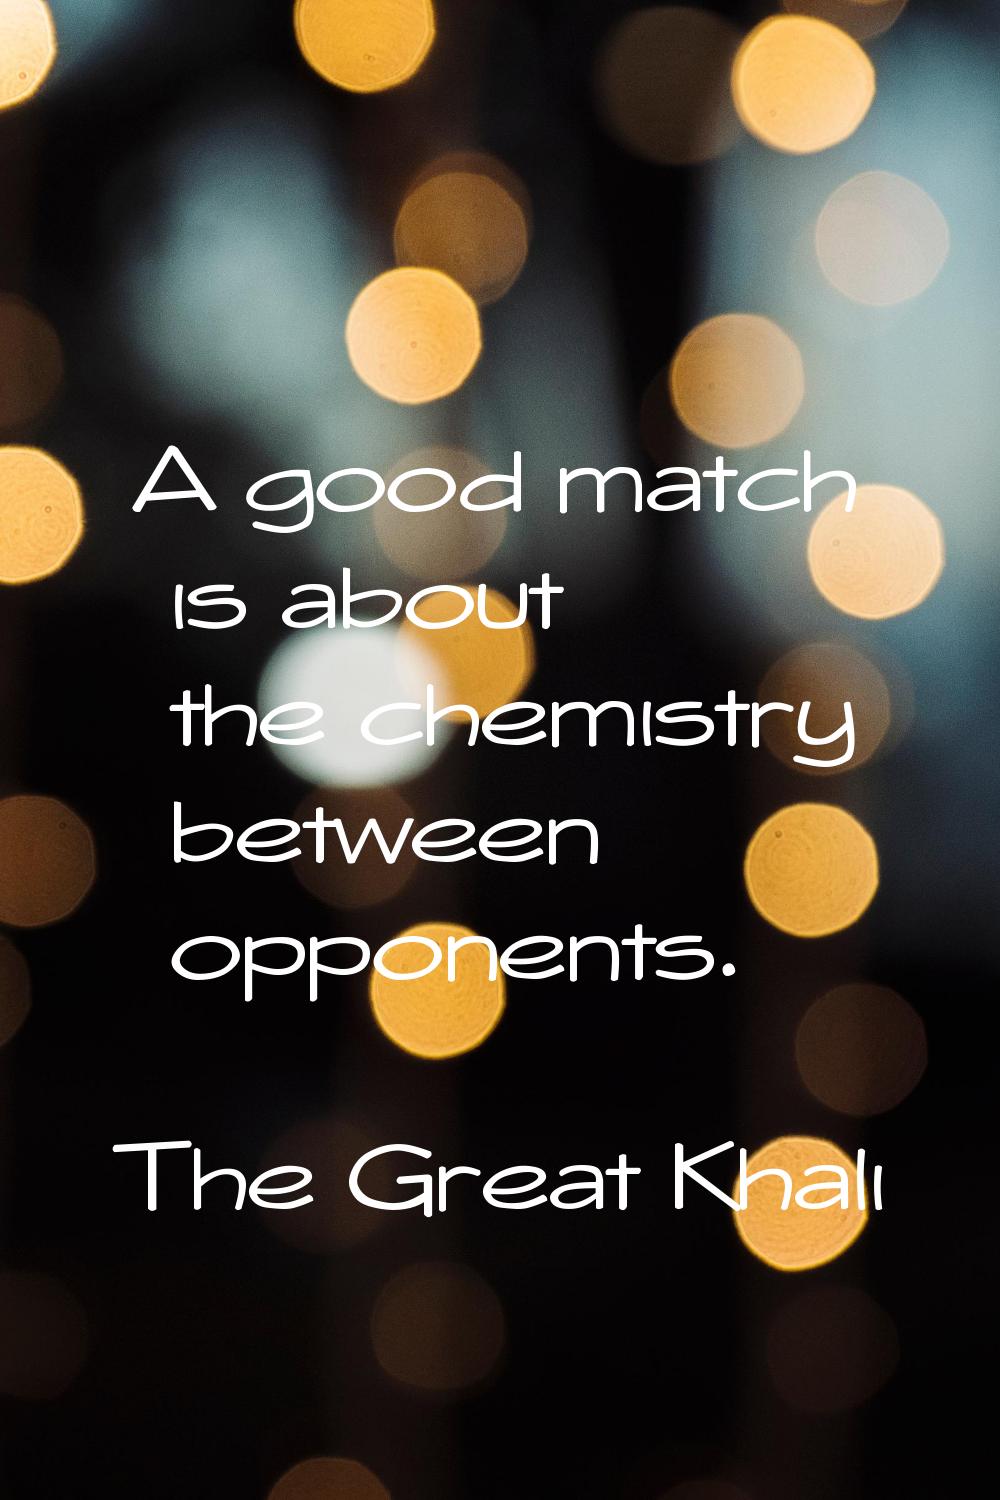 A good match is about the chemistry between opponents.